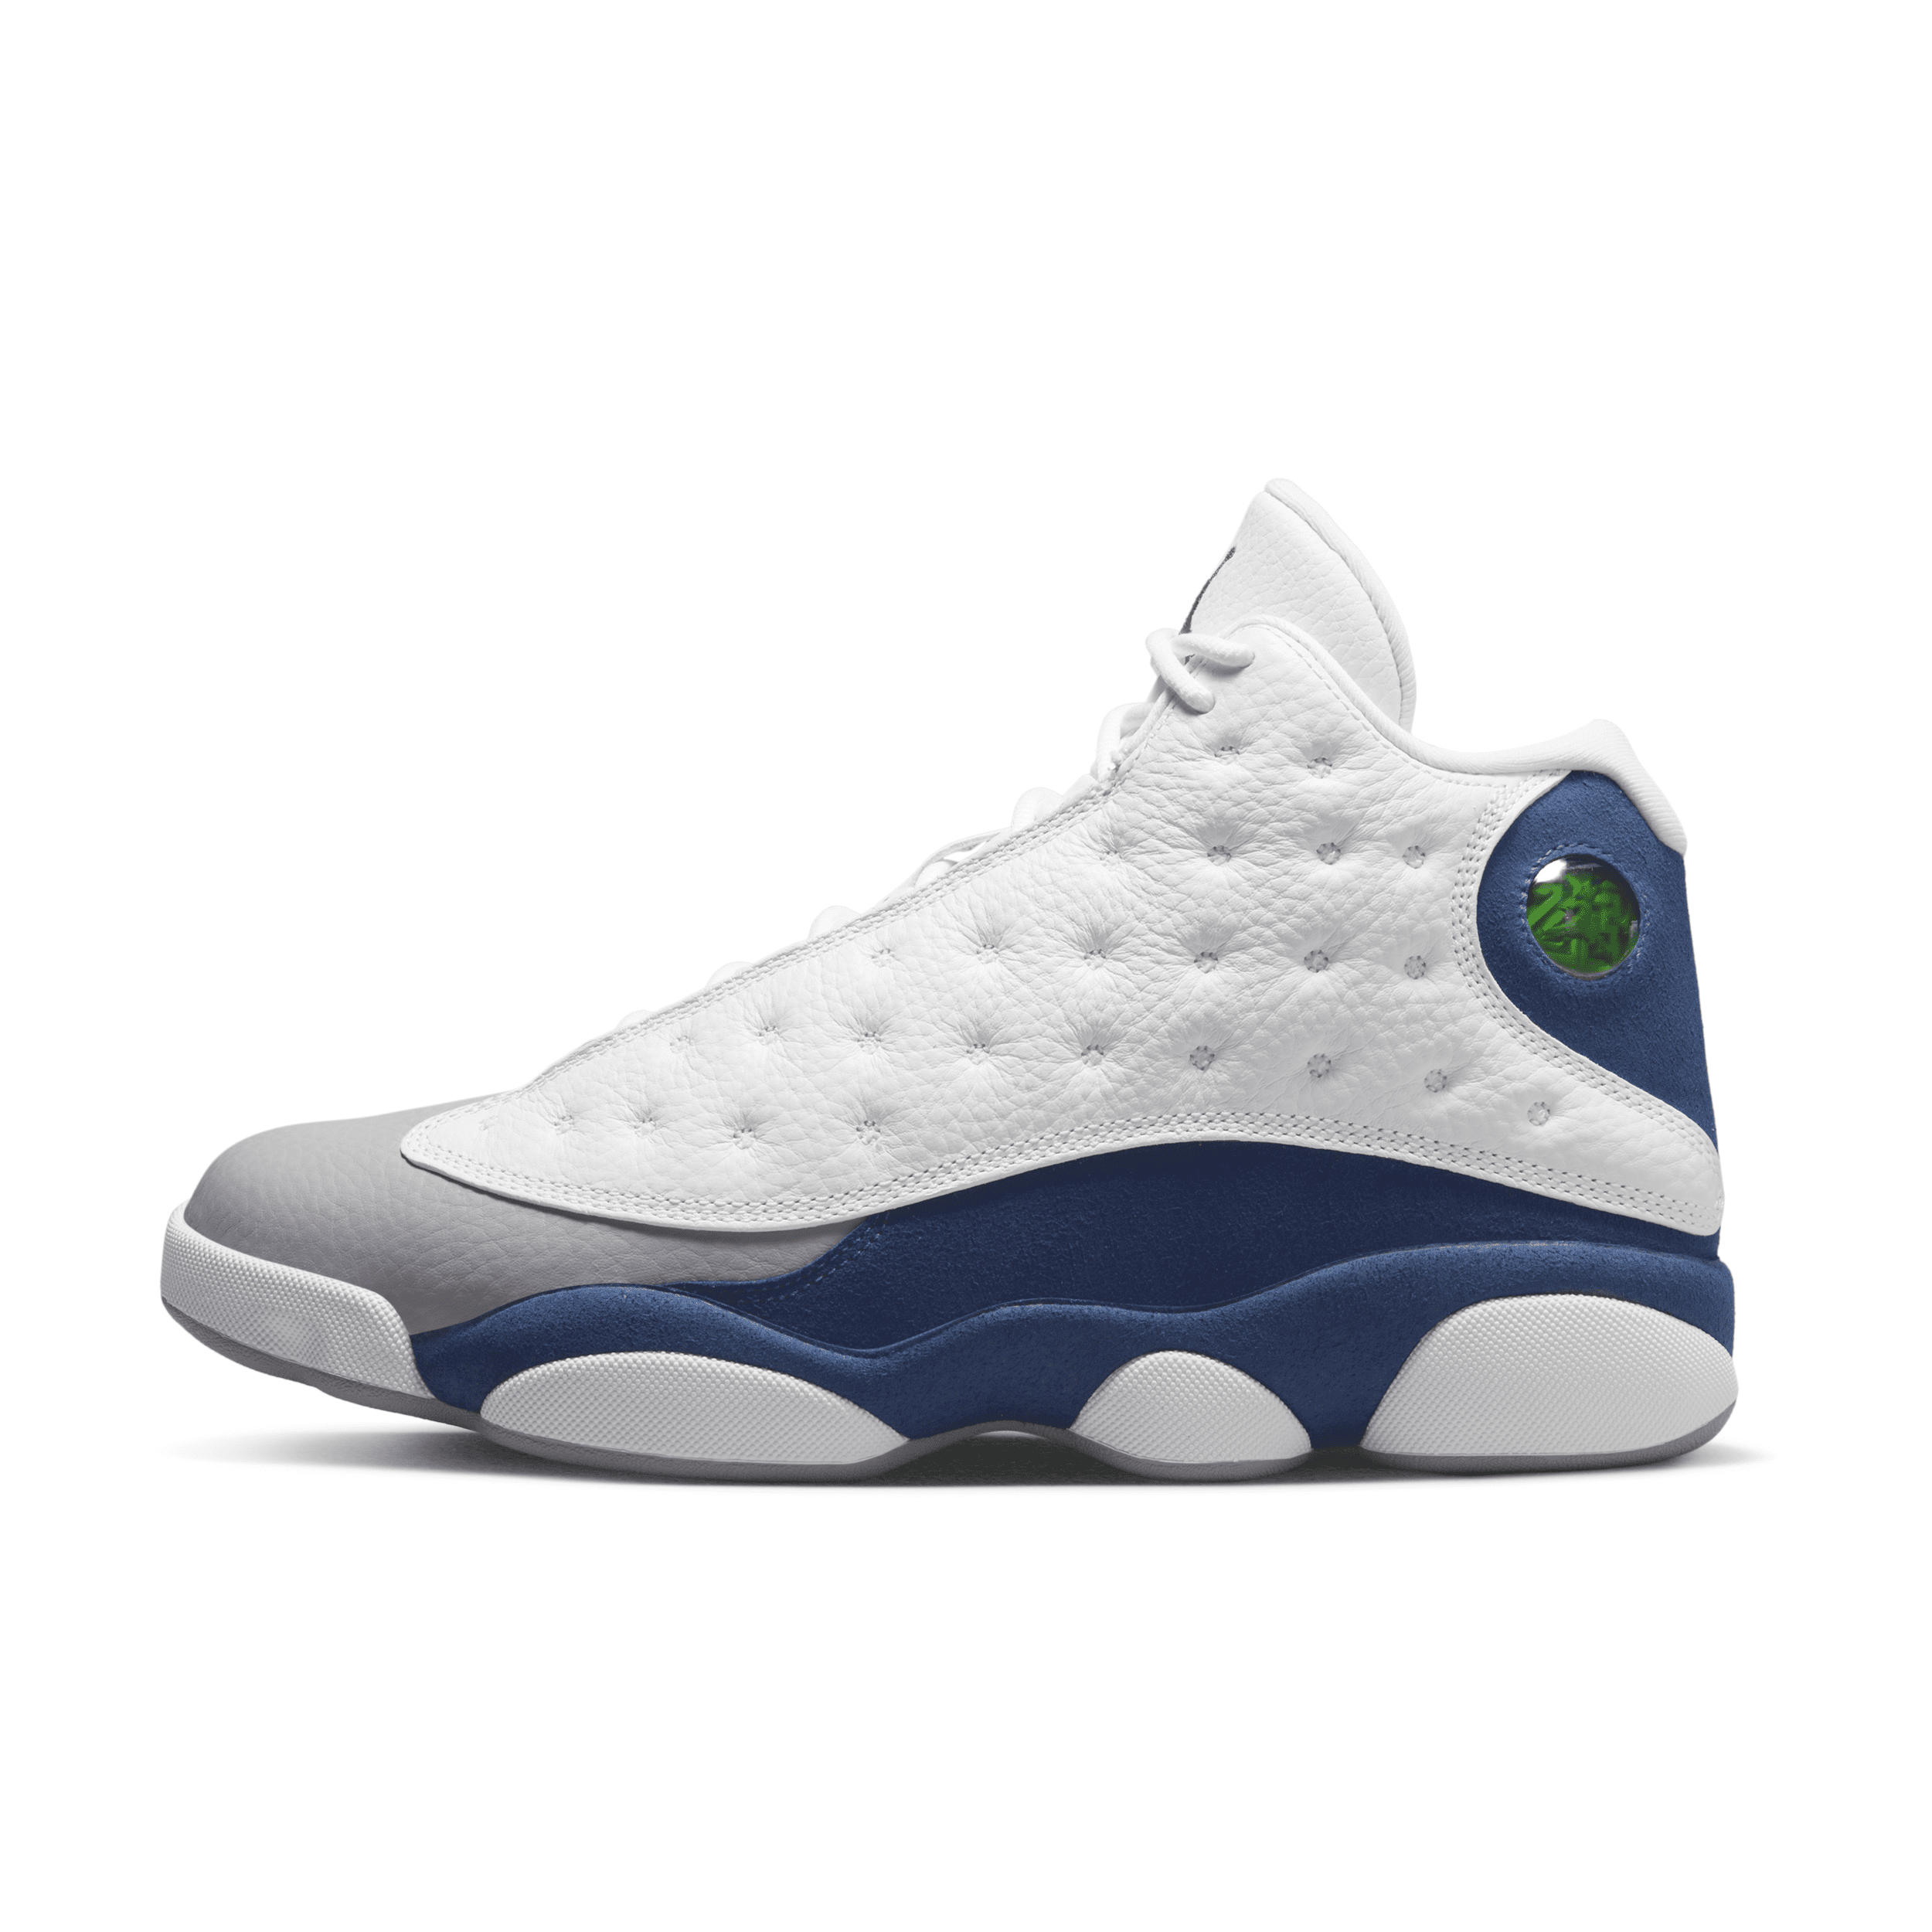 The Air Jordan 13 Retro brings back the memorable game shoe that Michael Jordan wore during the '97–98 season, all the way to his 6th championship title. All the classic details are there like the quilted overlay, iconic sculpted midsole and holographic eye. Genuine leather and textile materials in the upper.Phylon midsole with encapsulated Zoom Air unit in the forefoot and heel.Rubber outsole pods are strategically placed to optimise traction and flexibility.Not intended for use as Personal Protective Equipment (PPE)